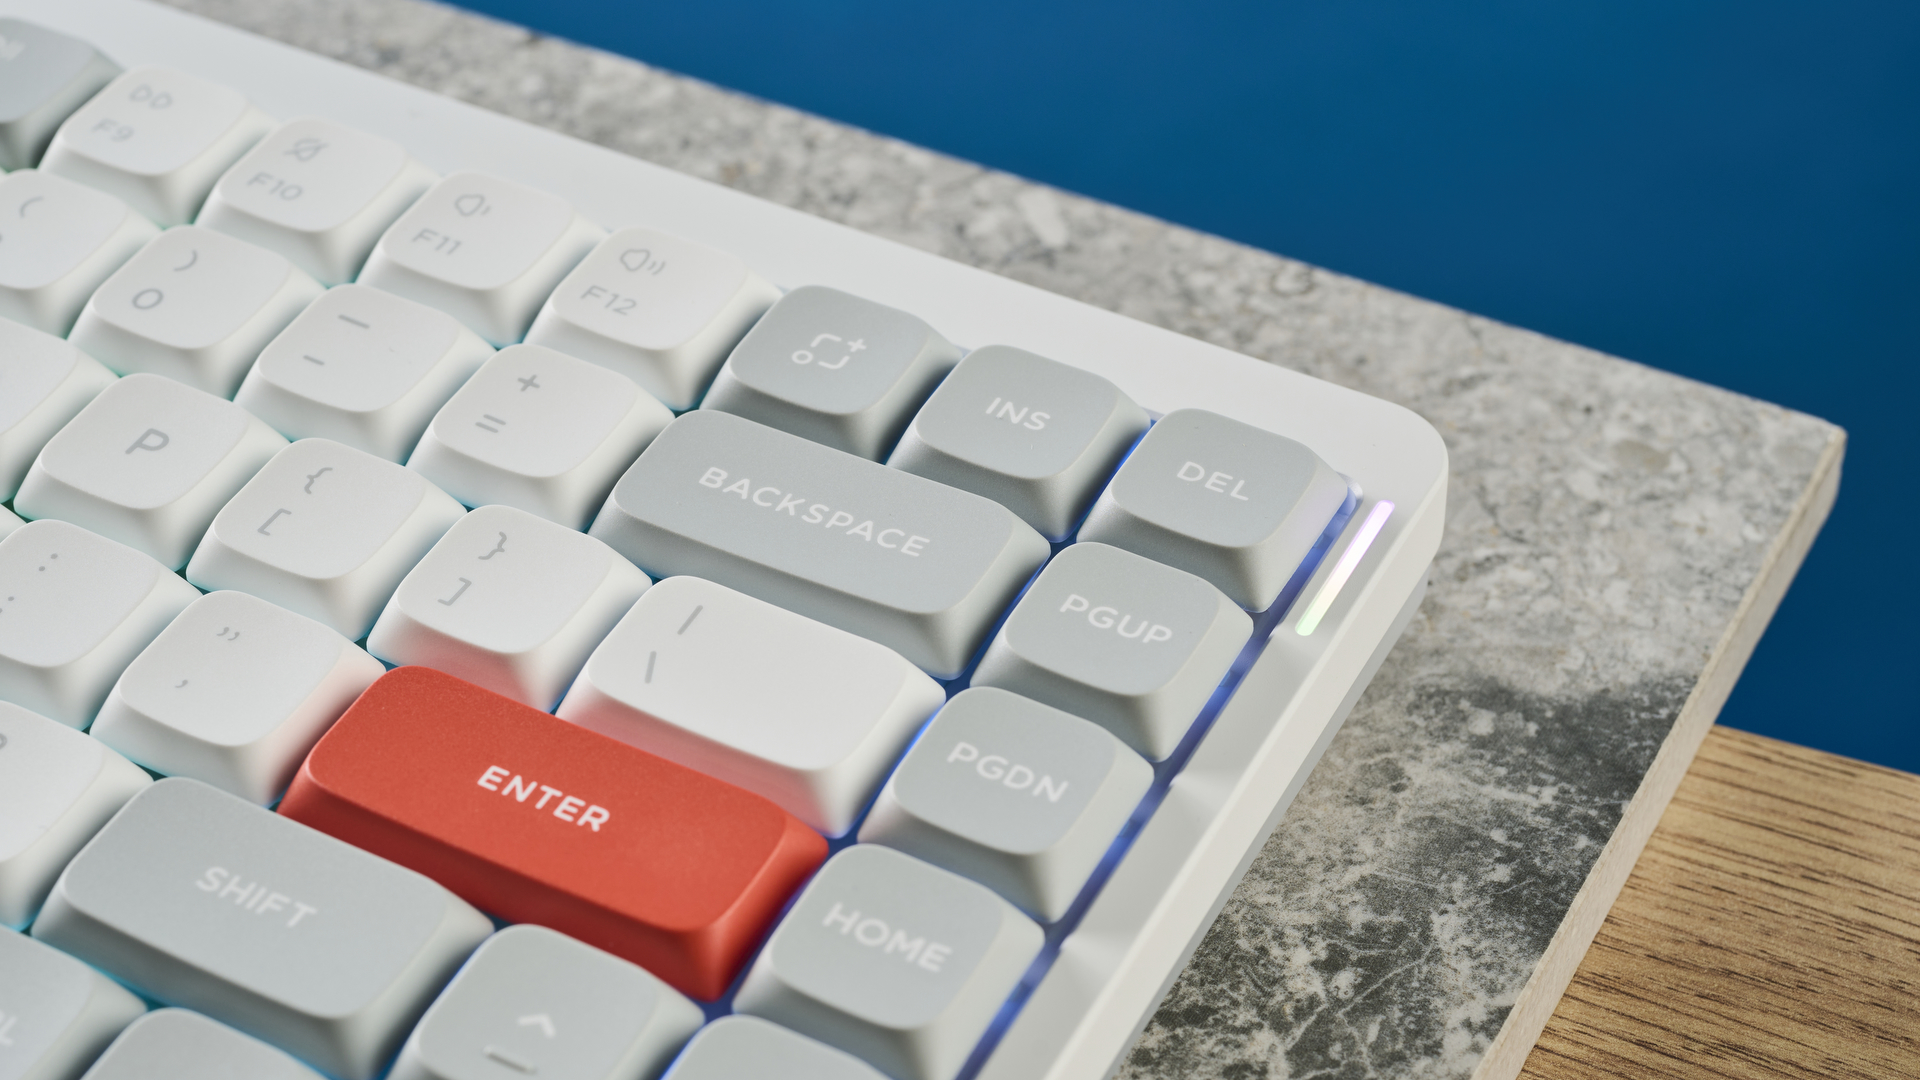 A photo of the NuPhy Air75 V2's enter and right-hand keys, on a stone slab with a blue wall in the background.